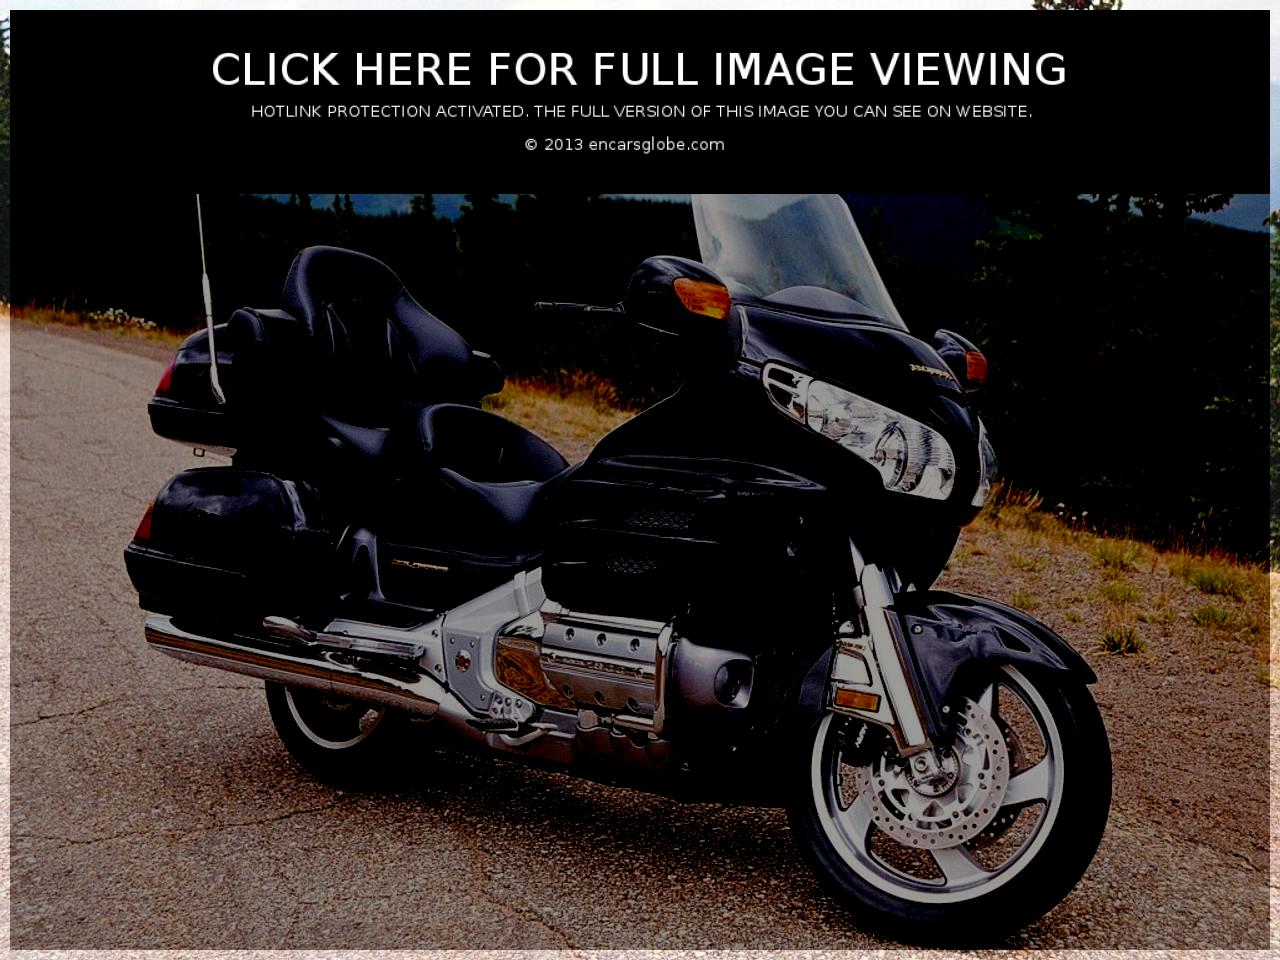 Honda Gold Wing GL 1800: Photo gallery, complete information about ...